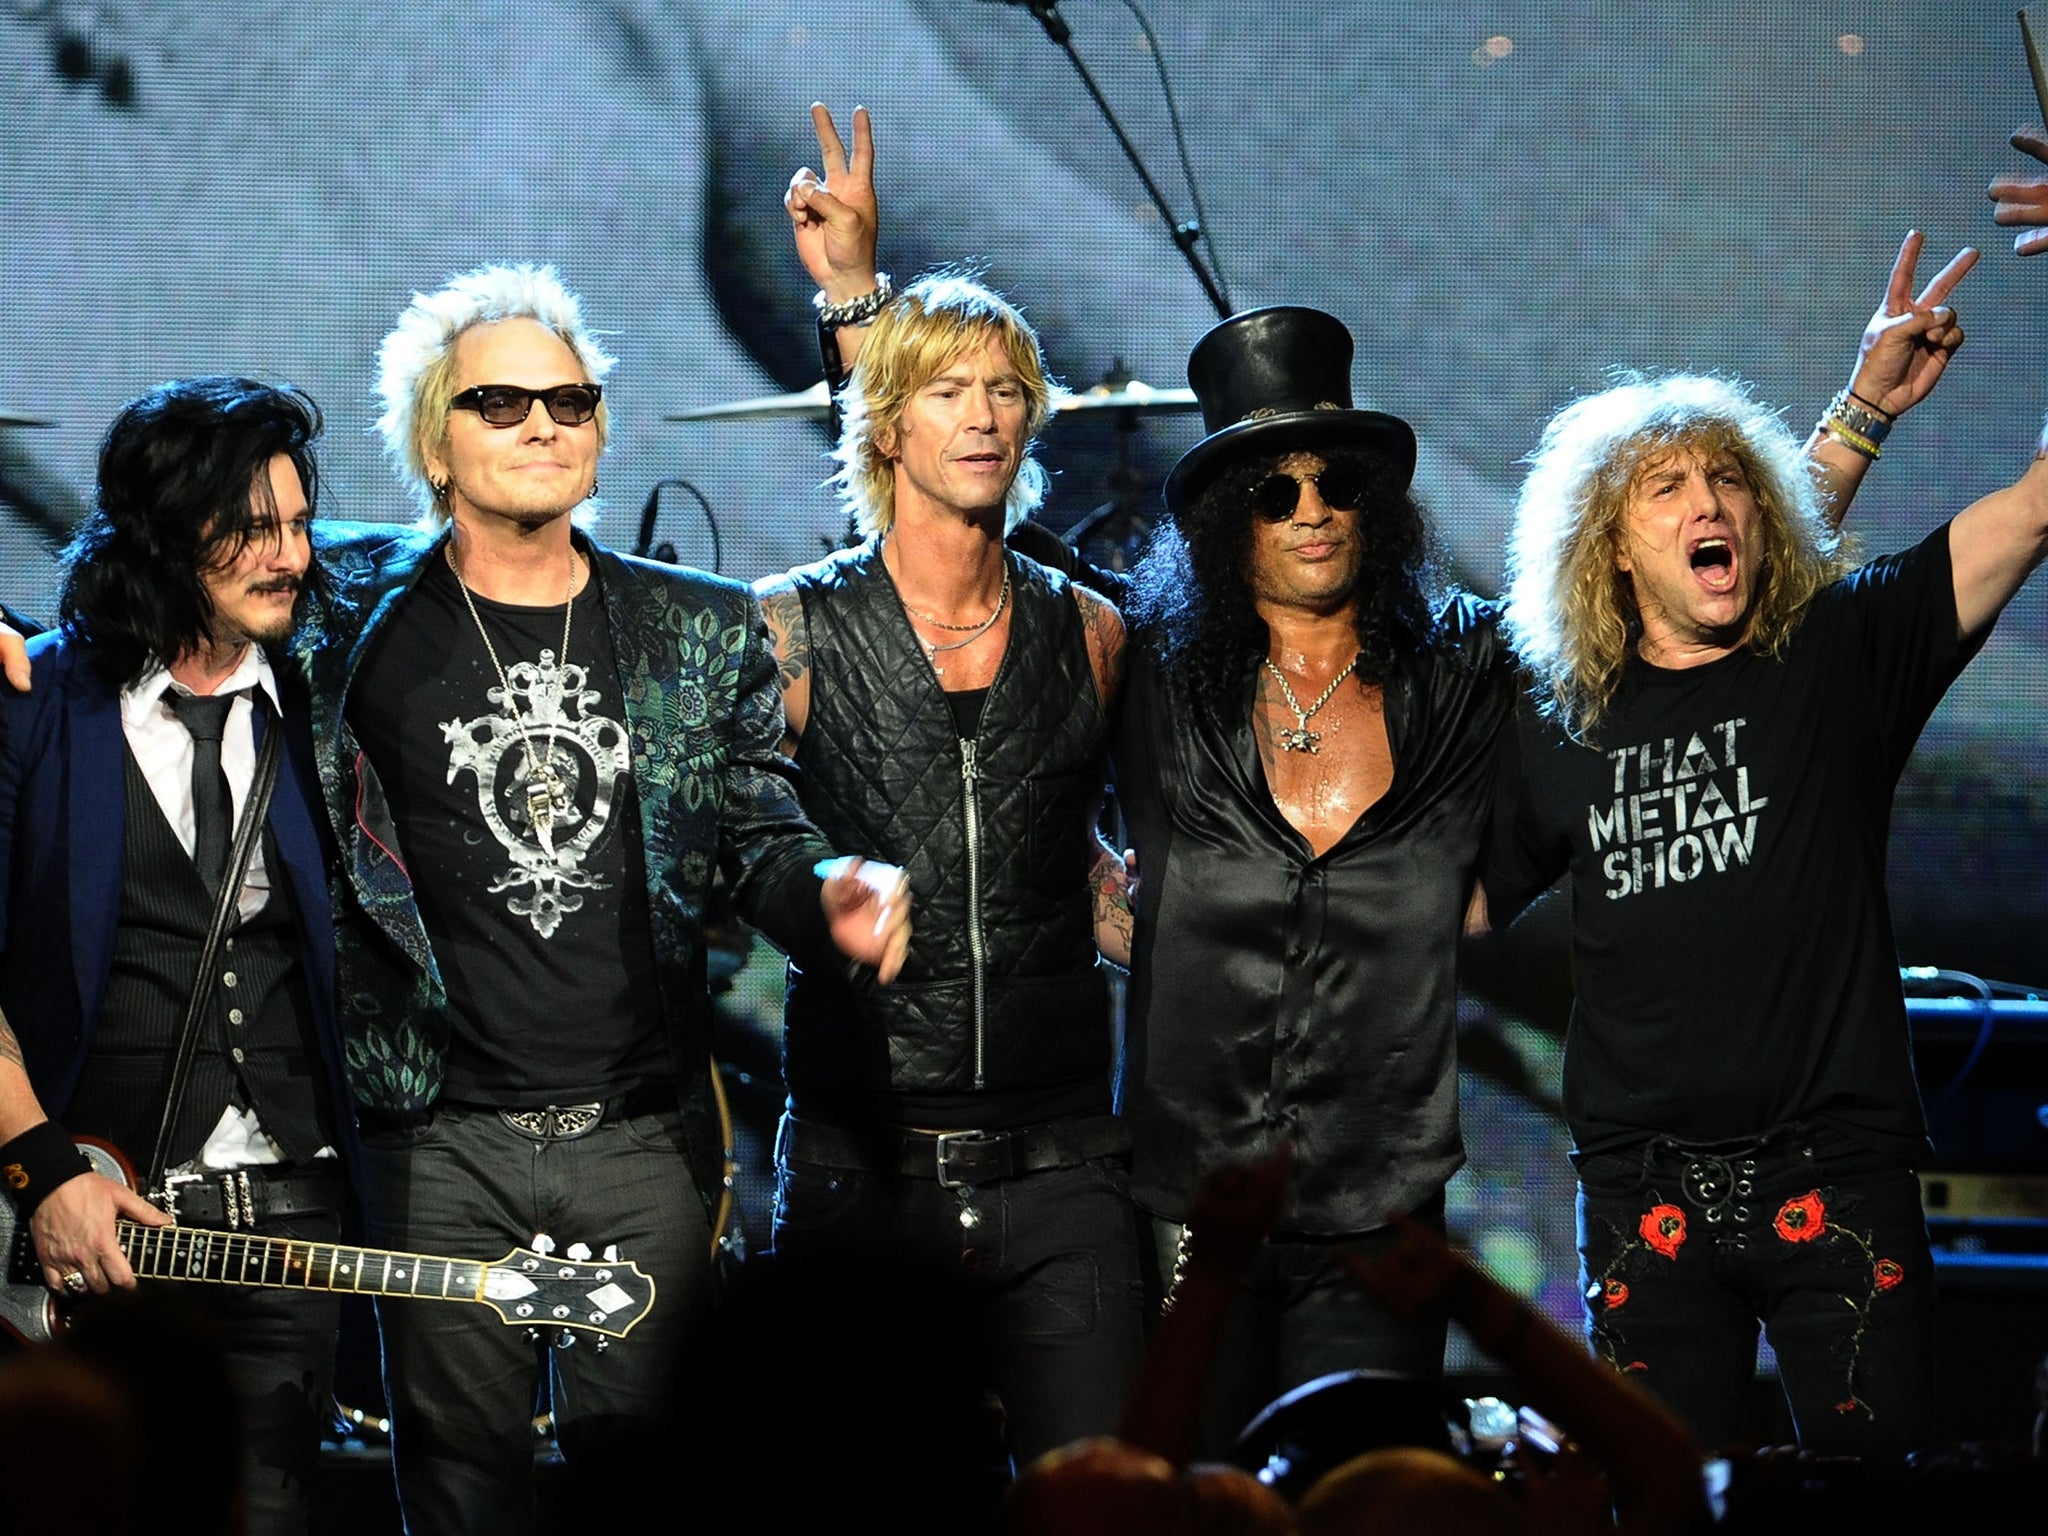 Guns N'Roses are reuniting to play Coachella and a string of stadium dates